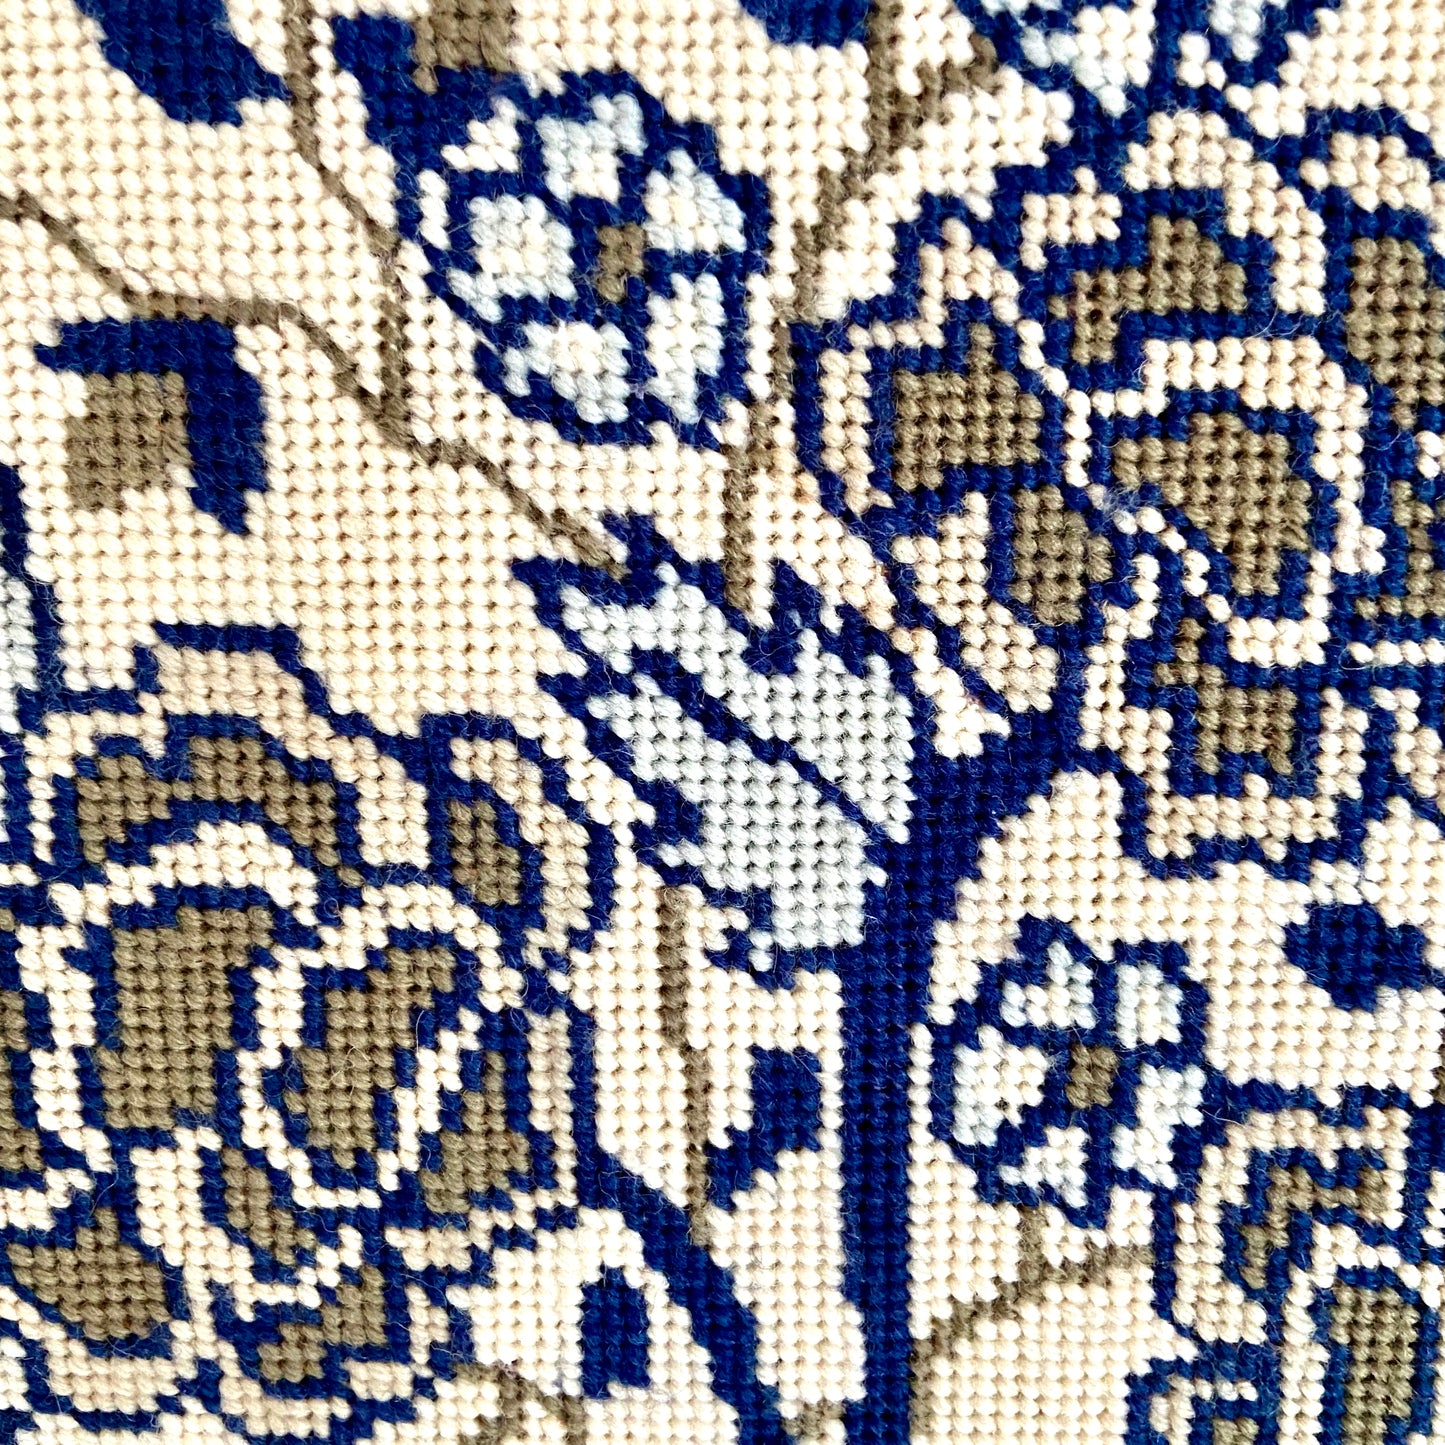 Gorgeous vintage blue and white chinoiserie needlepoint custom framed wall art